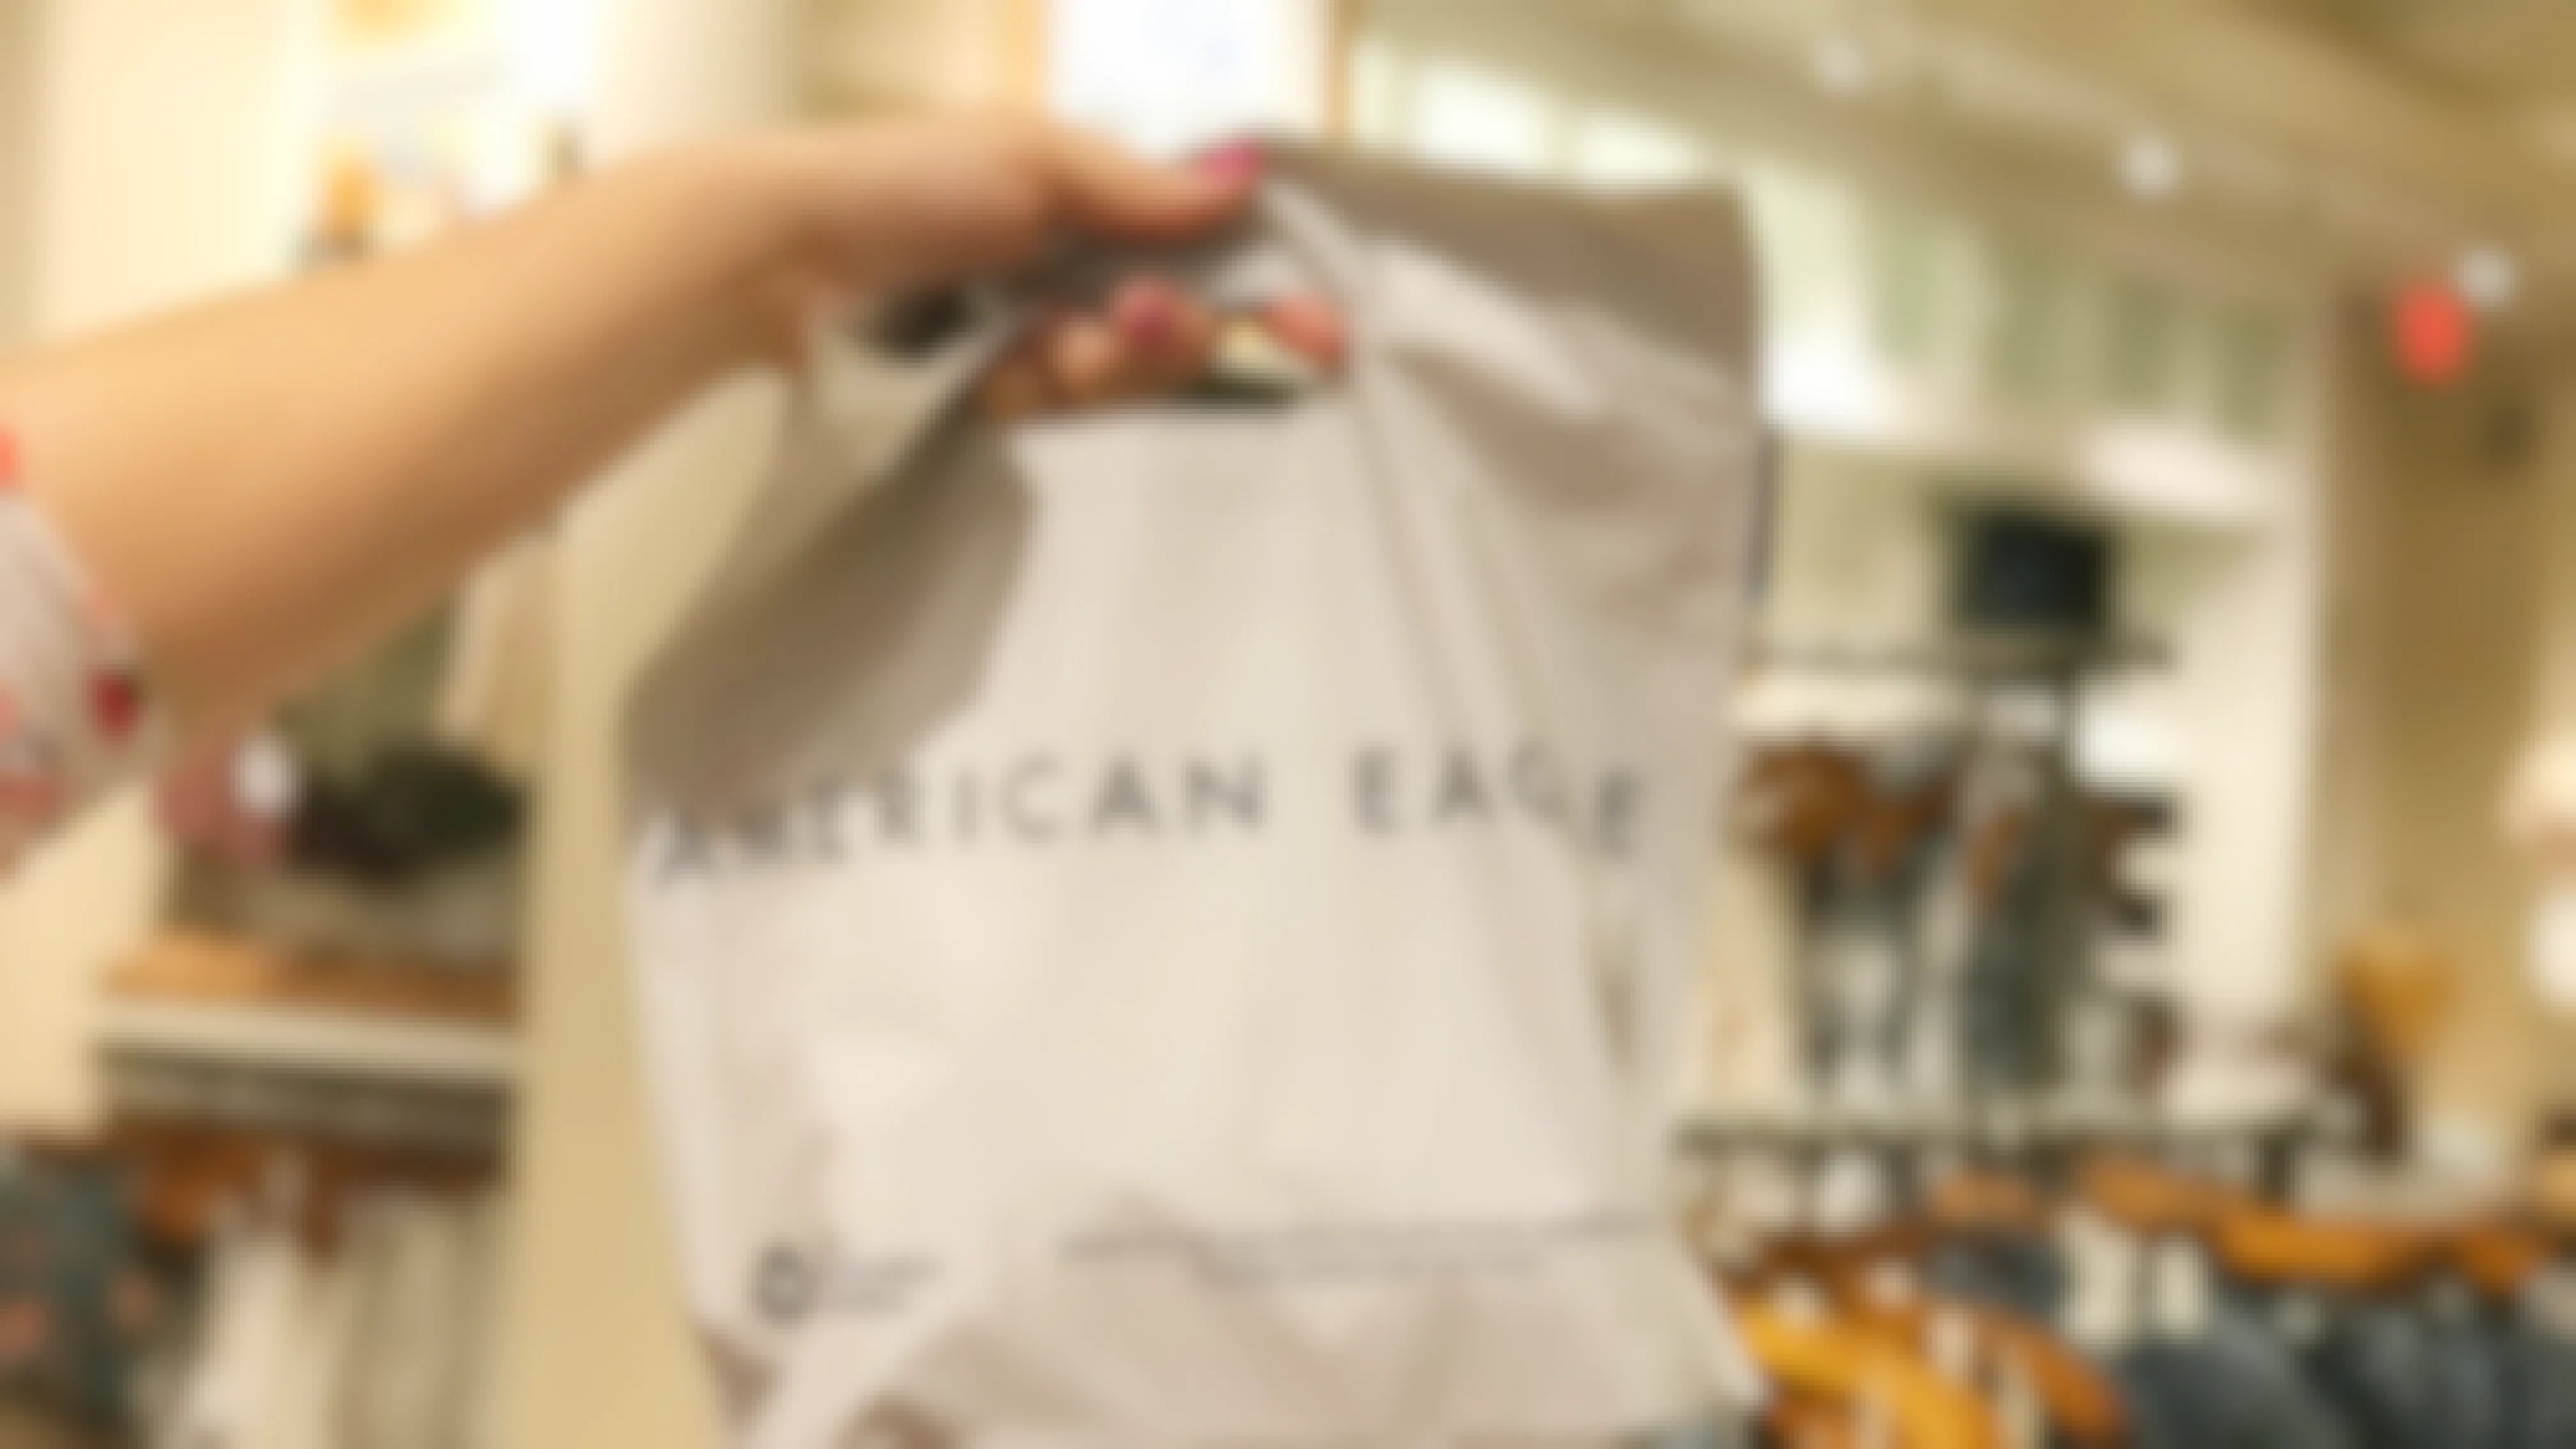 A person's hand holding up an American Eagle shopping bag.